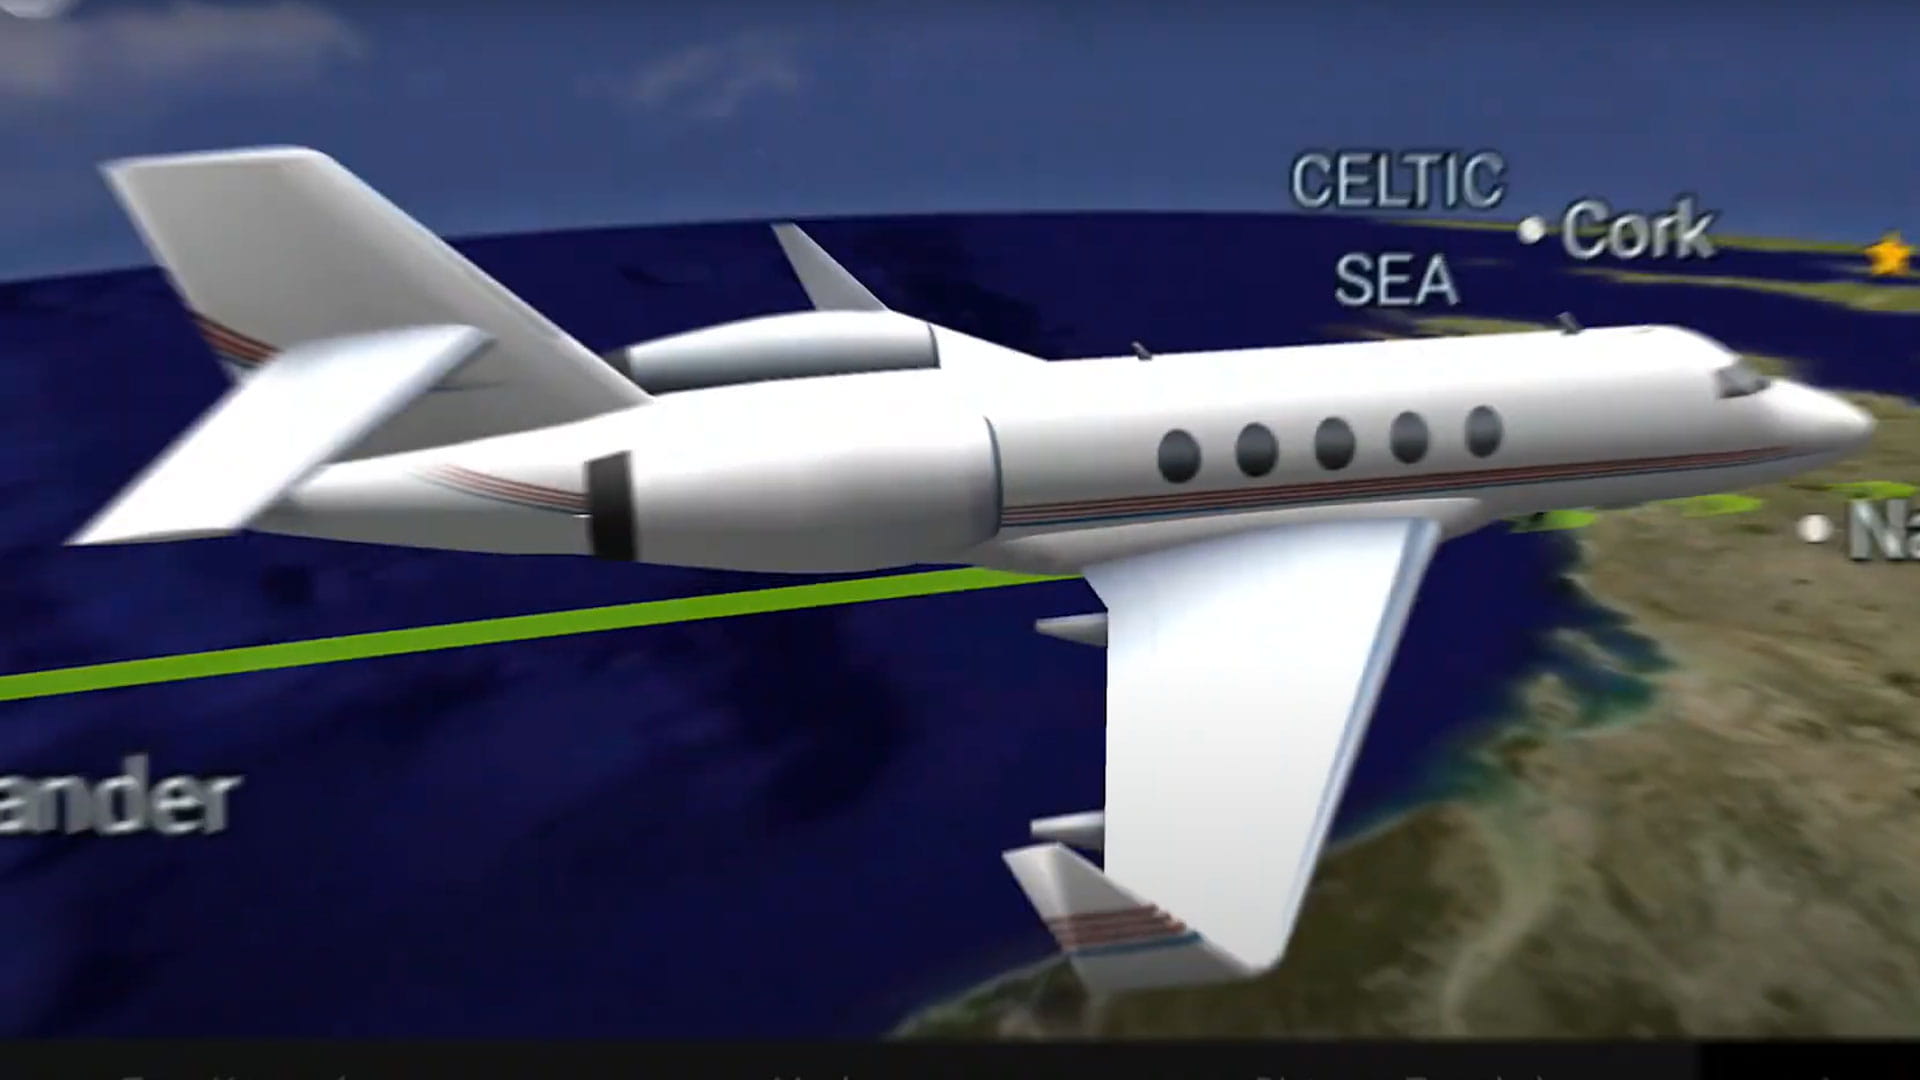 Computer rendering of a business jet flying over the Celtic Sea